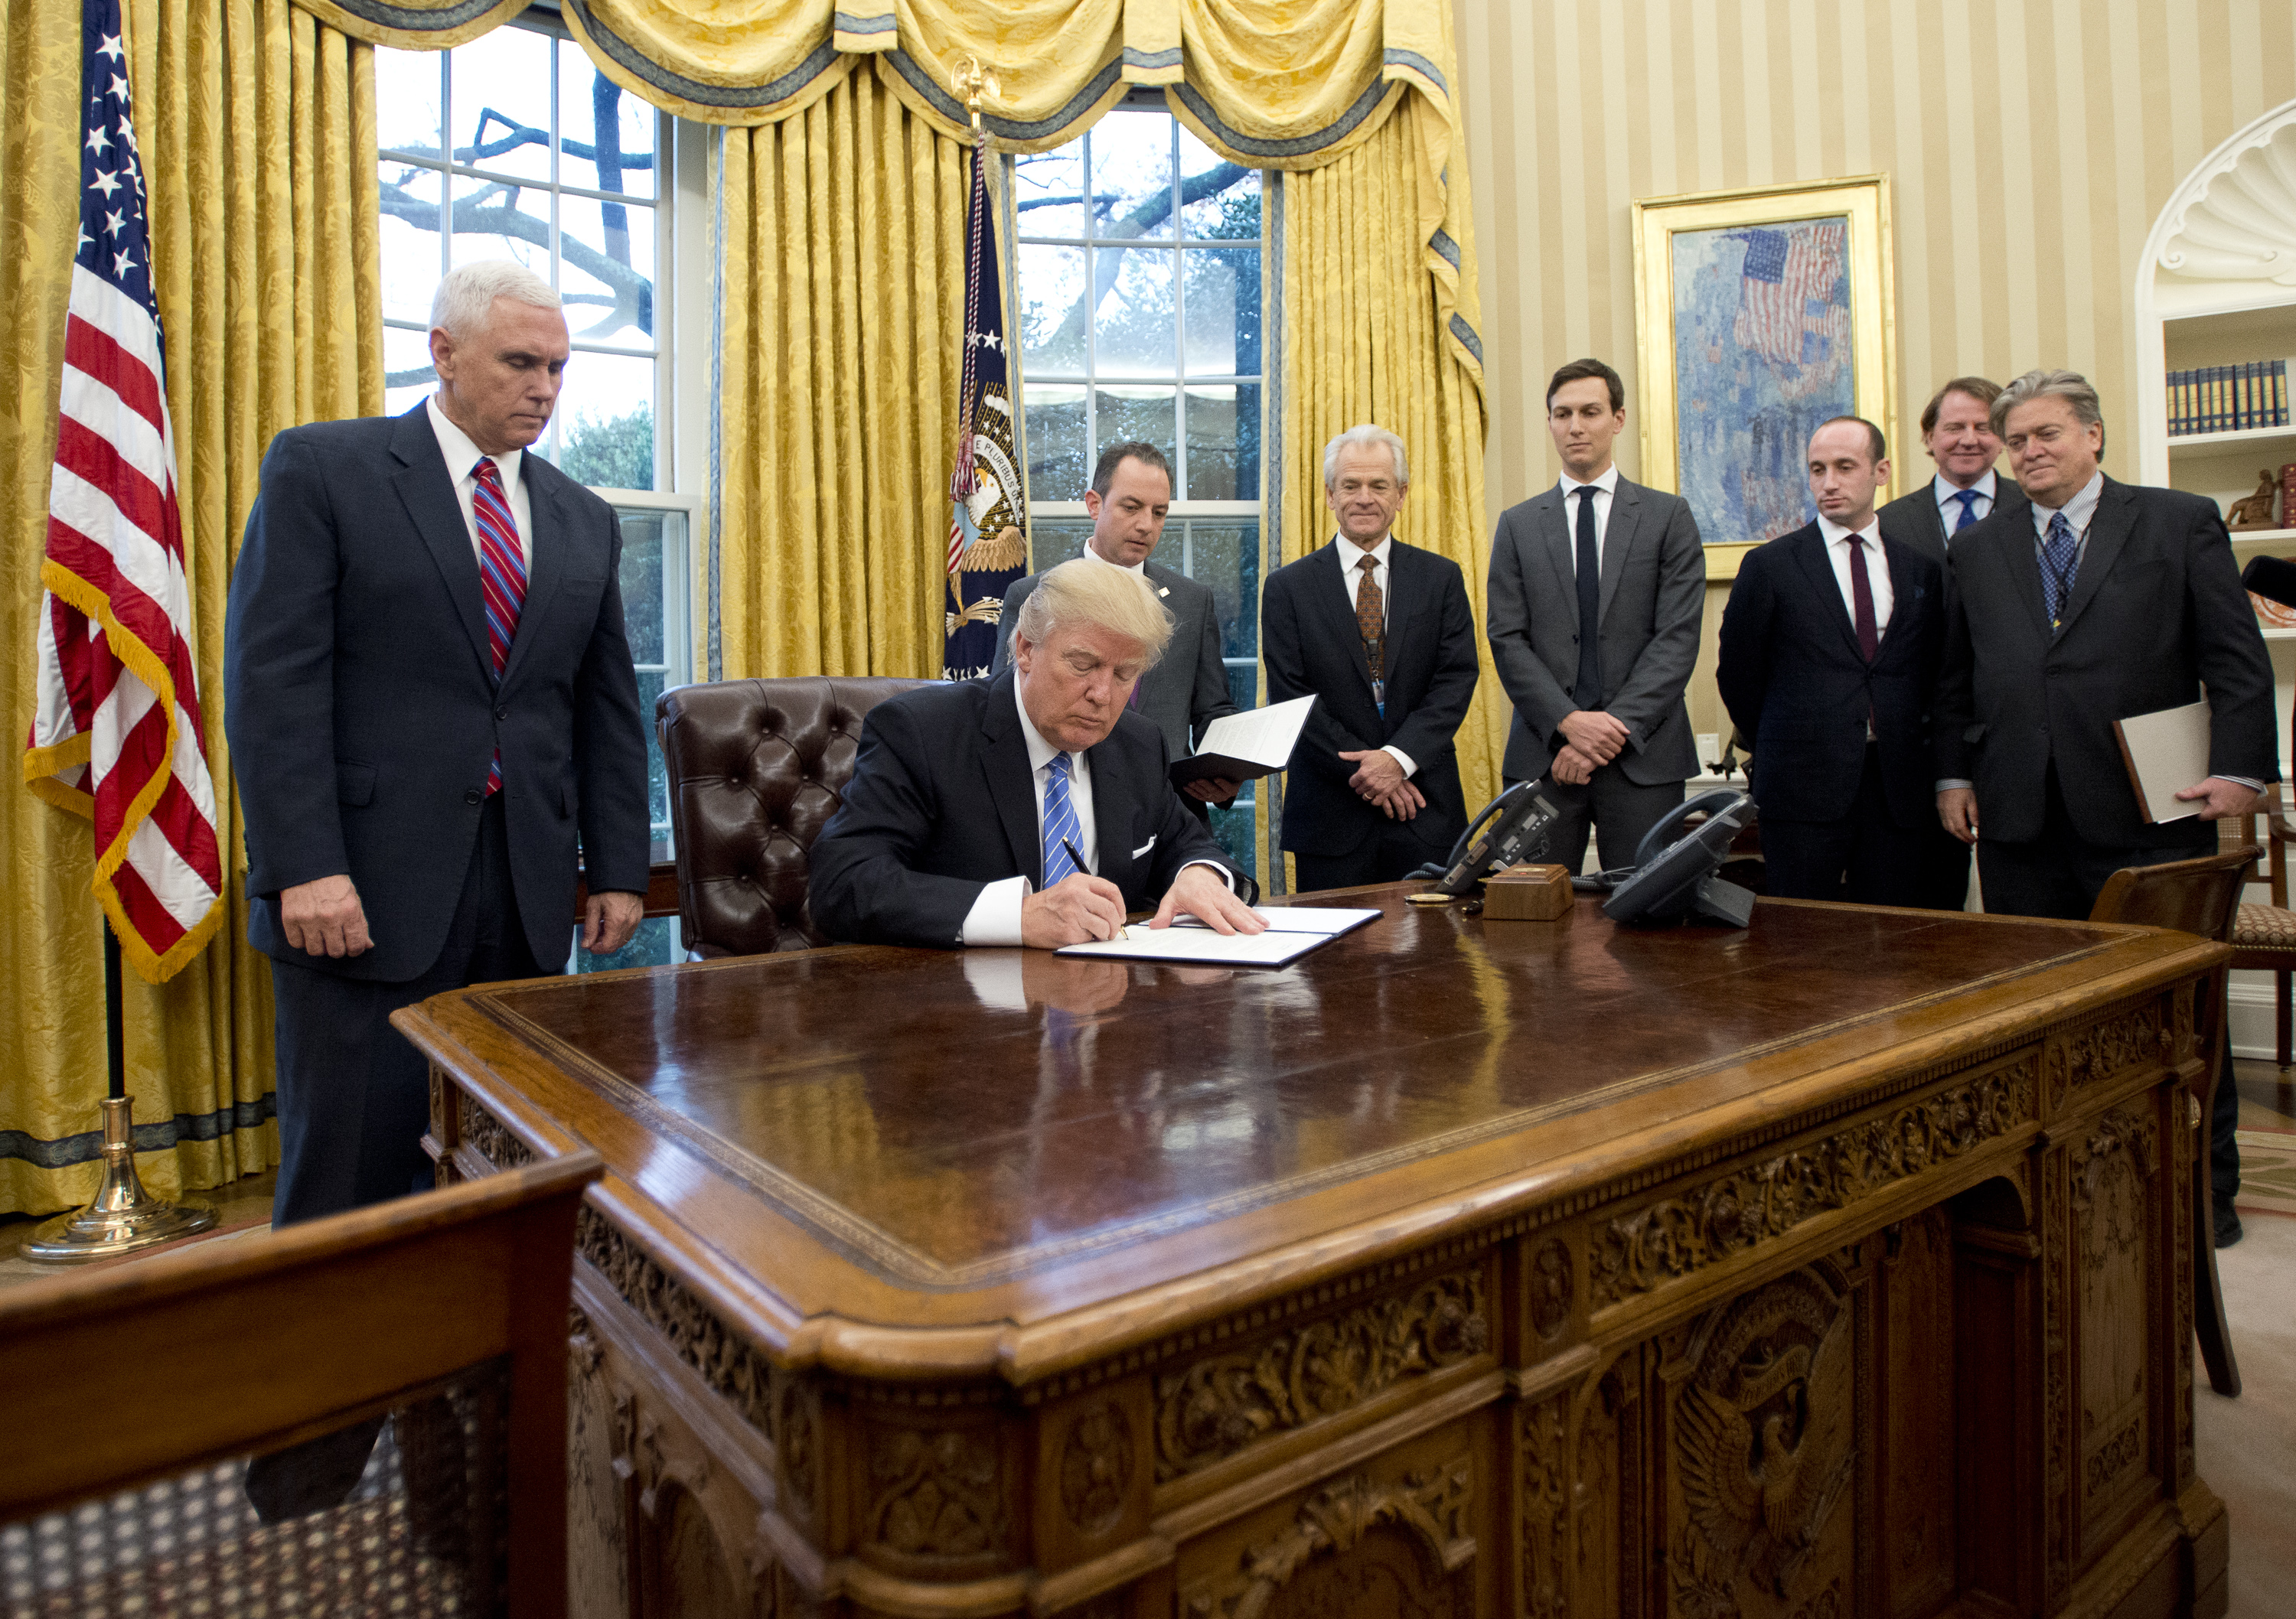 WASHINGTON, DC - JANUARY 23: (AFP OUT) U.S. President Donald Trump signs the first of three Executive Orders in the Oval Office of the White House in Washington, DC on Monday, January 23, 2017. They concerned the withdrawal of the United States from the Trans-Pacific Partnership (TPP), a US Government hiring freeze for all departments but the military, and "Mexico City" which bans federal funding of abortions overseas. Standing behind the President, from left to right: US Vice President Mike Pence; White House Chief of Staff Reince Preibus; Peter Navarro, Director of the National Trade Council; Jared Kushner, Senior Advisor to the President; Steven Miller, Senior Advisor to the President; unknown; and Steve Bannon, White House Chief Strategist. (Photo by Ron Sachs - Pool/Getty Images)